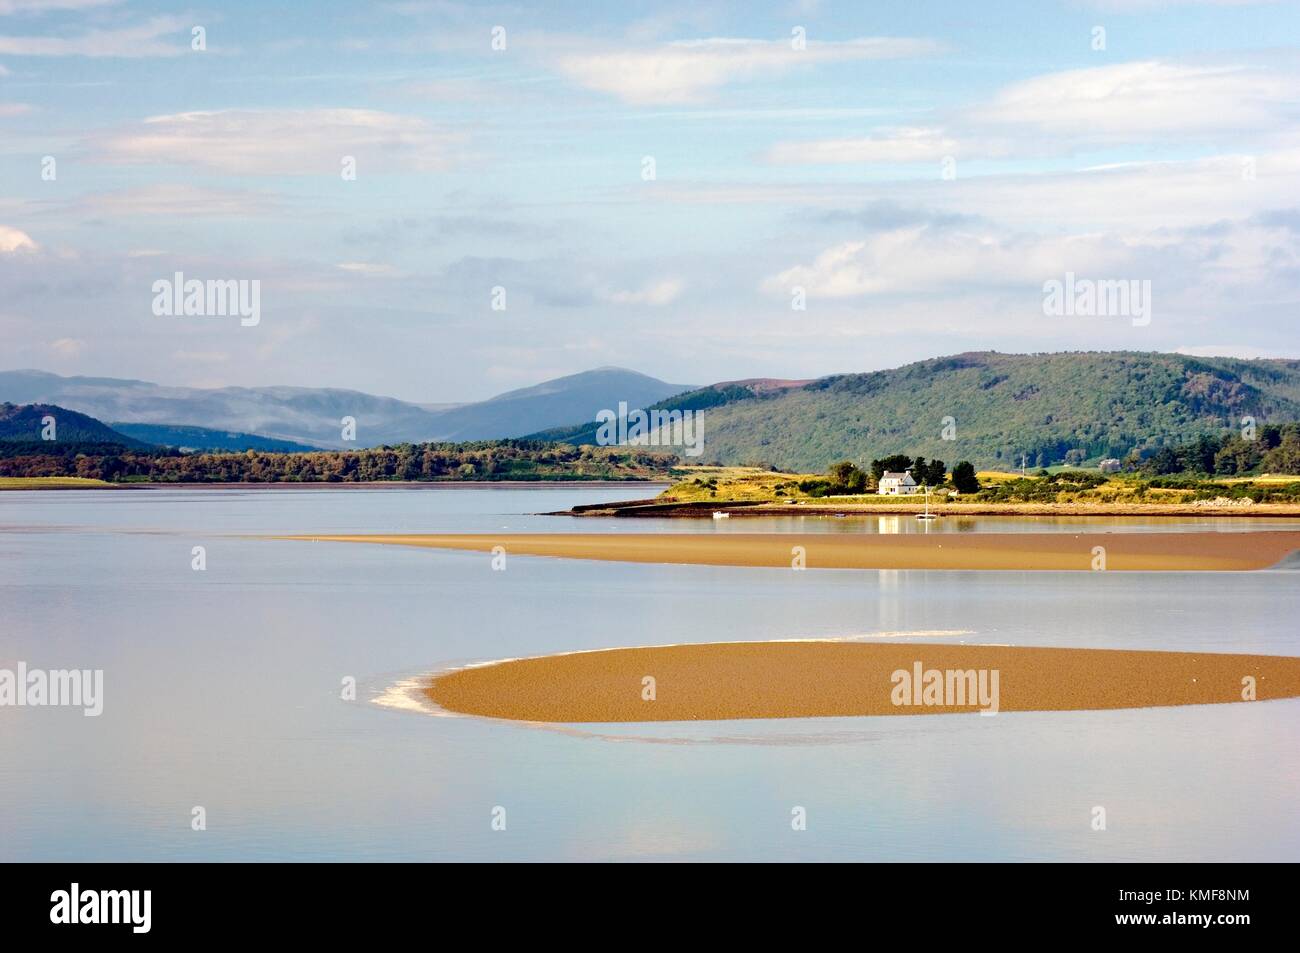 West over tidal estuary of the Dornoch Firth in Easter Ross from the A9 road bridge between Tain and Dornoch, Highland, Scotland Stock Photo